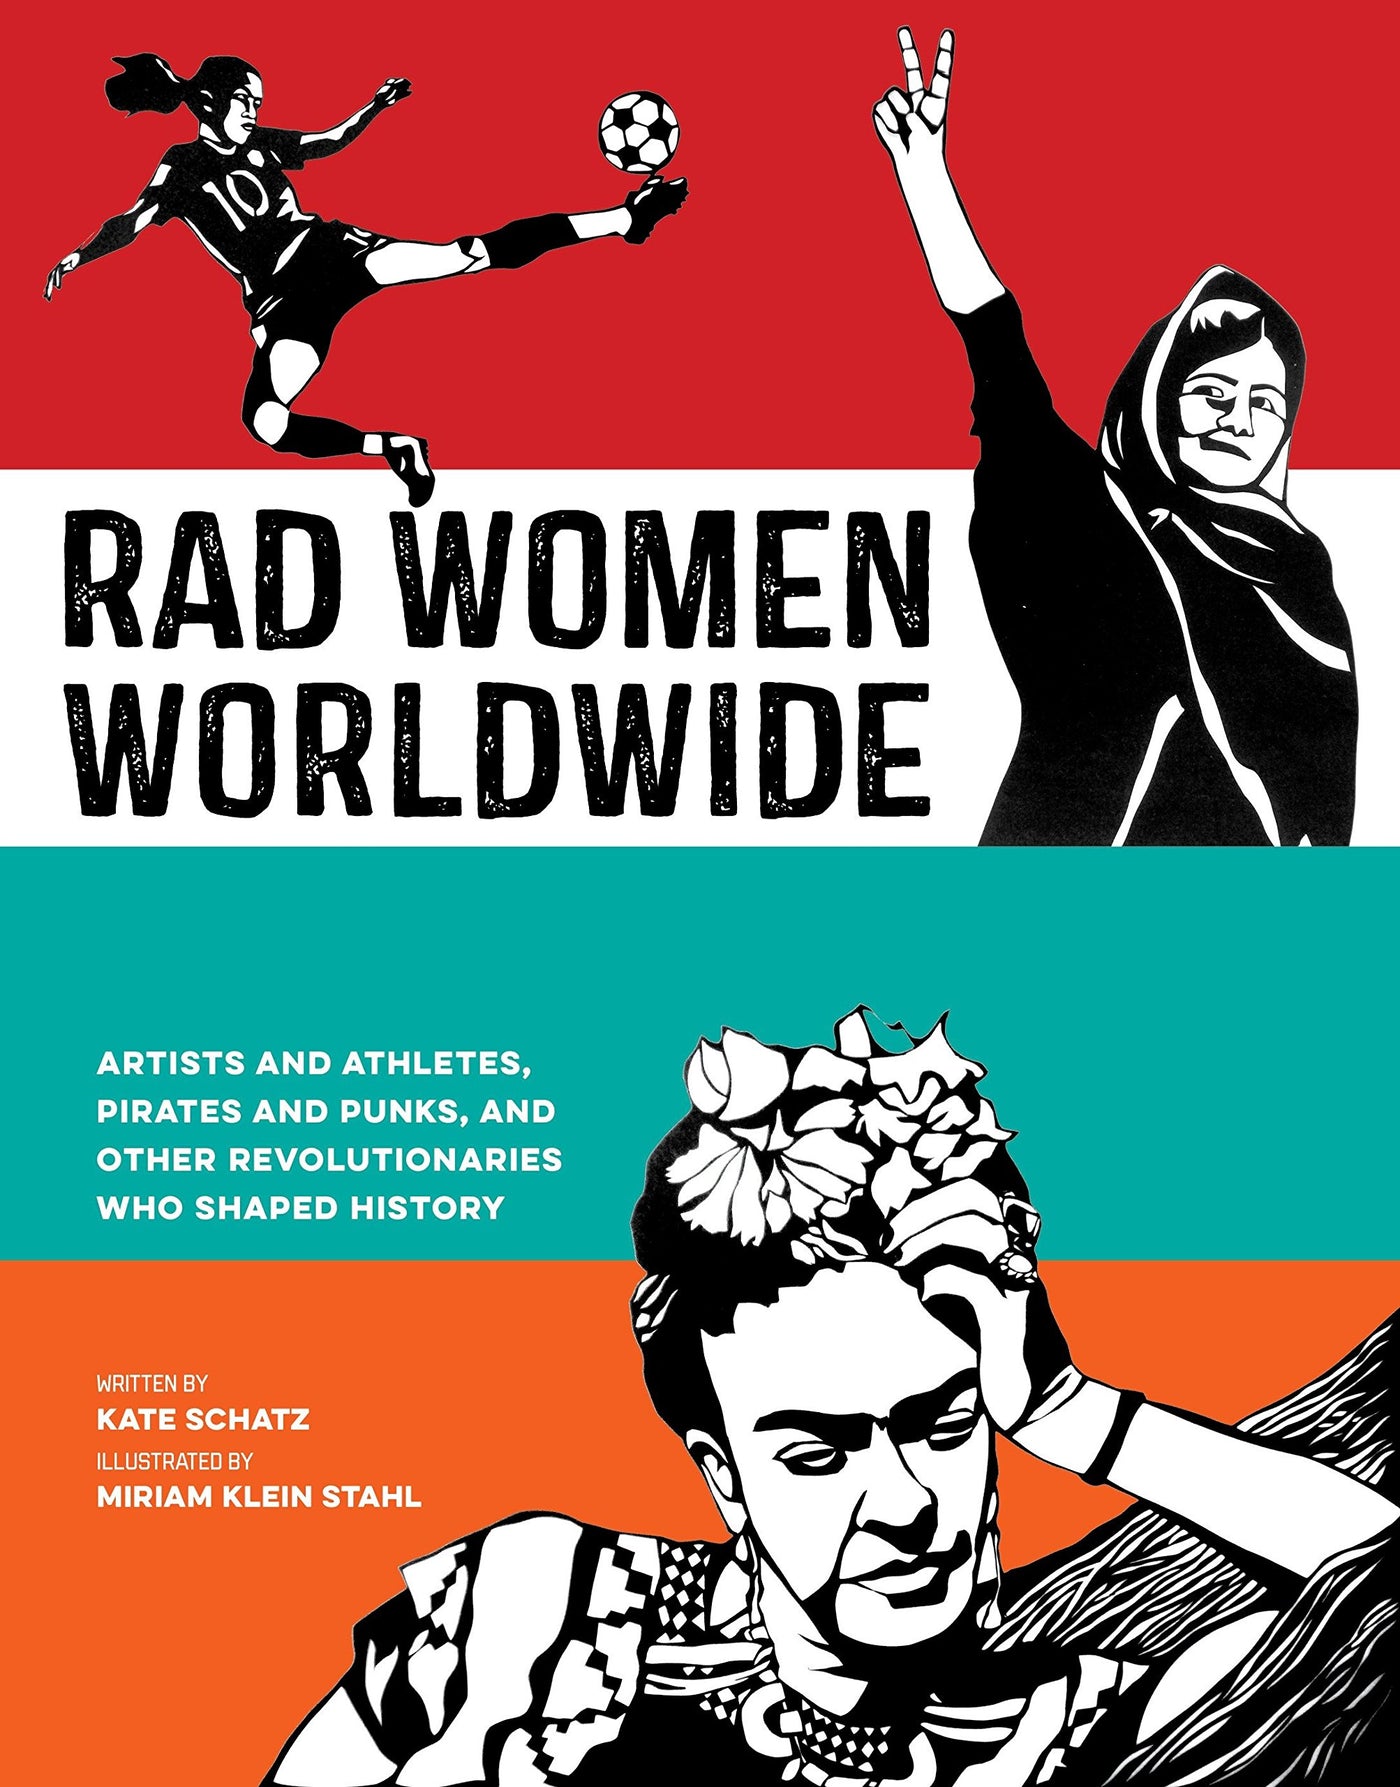 Rad Women Worldwide: Artists and Athletes, Pirates and Punks, and Other Revolutionaries Who Shaped History by Kate Schatz